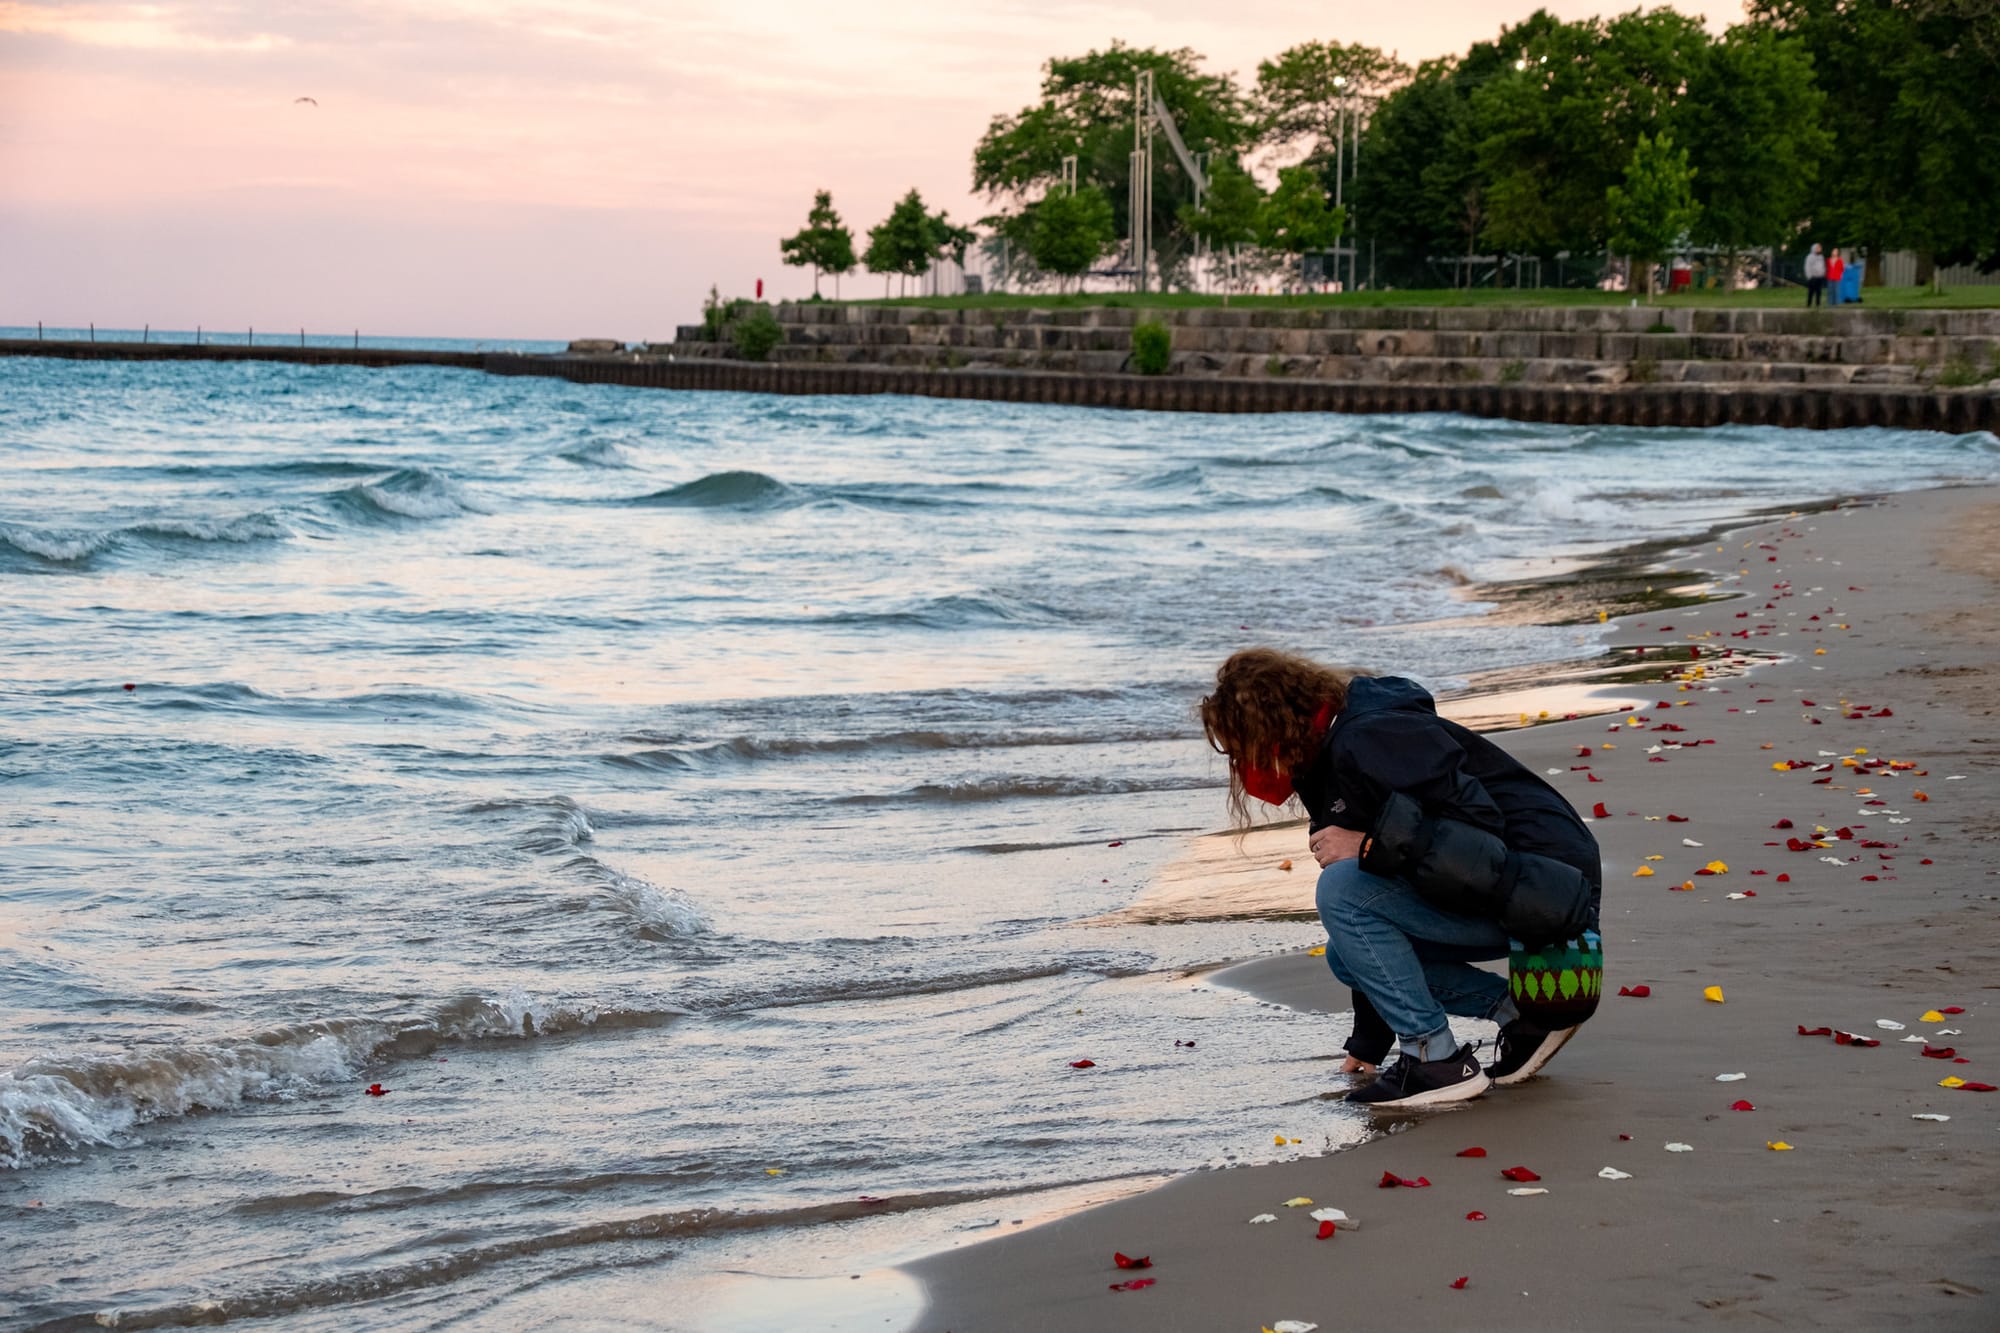 A mourner kneels beside Lake Michigan. Rose petals wash up all around them.